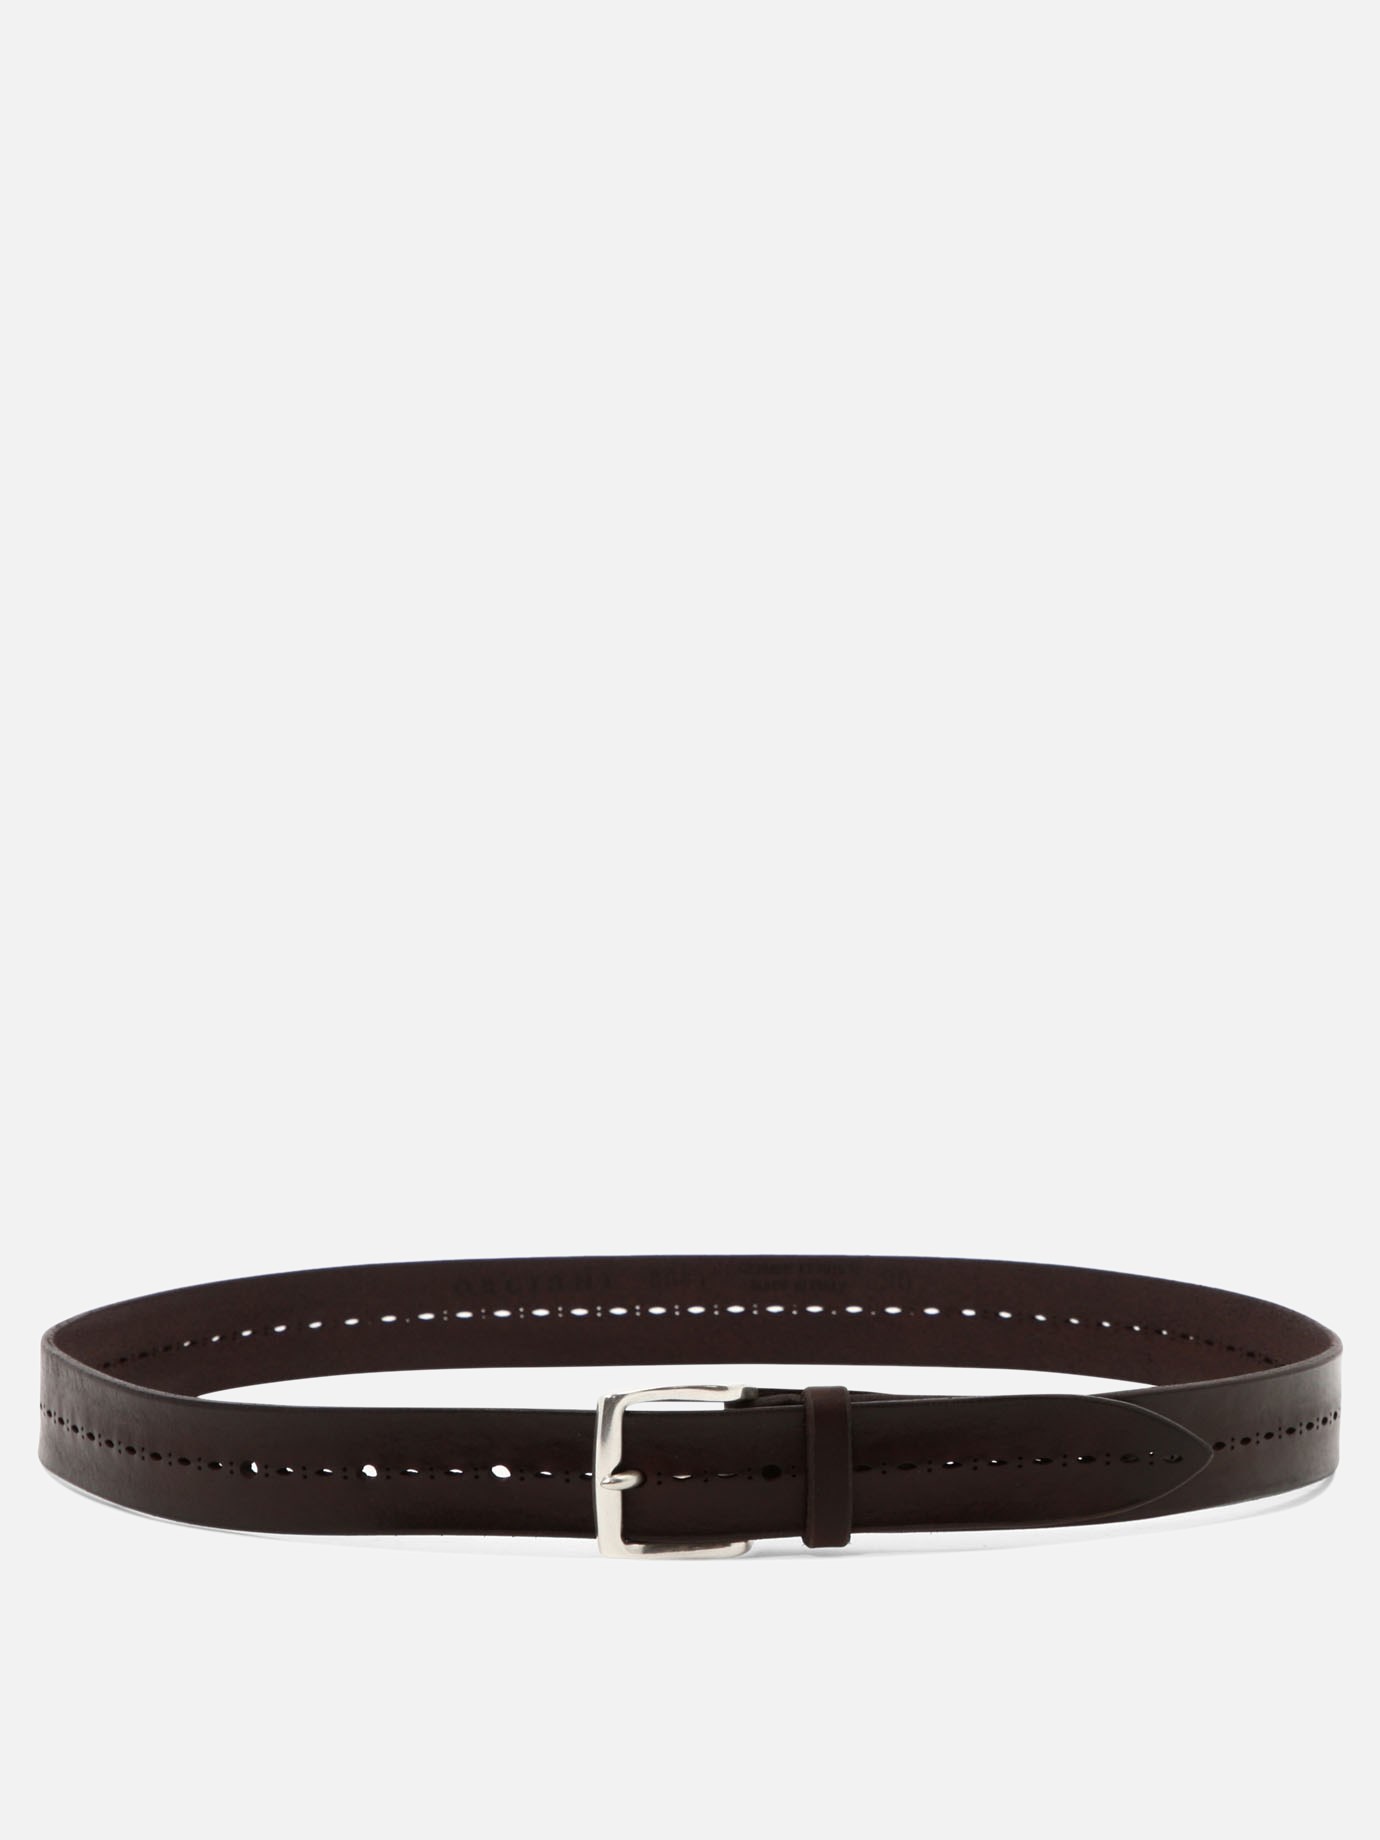  Bull Soft  beltby Orciani - 1